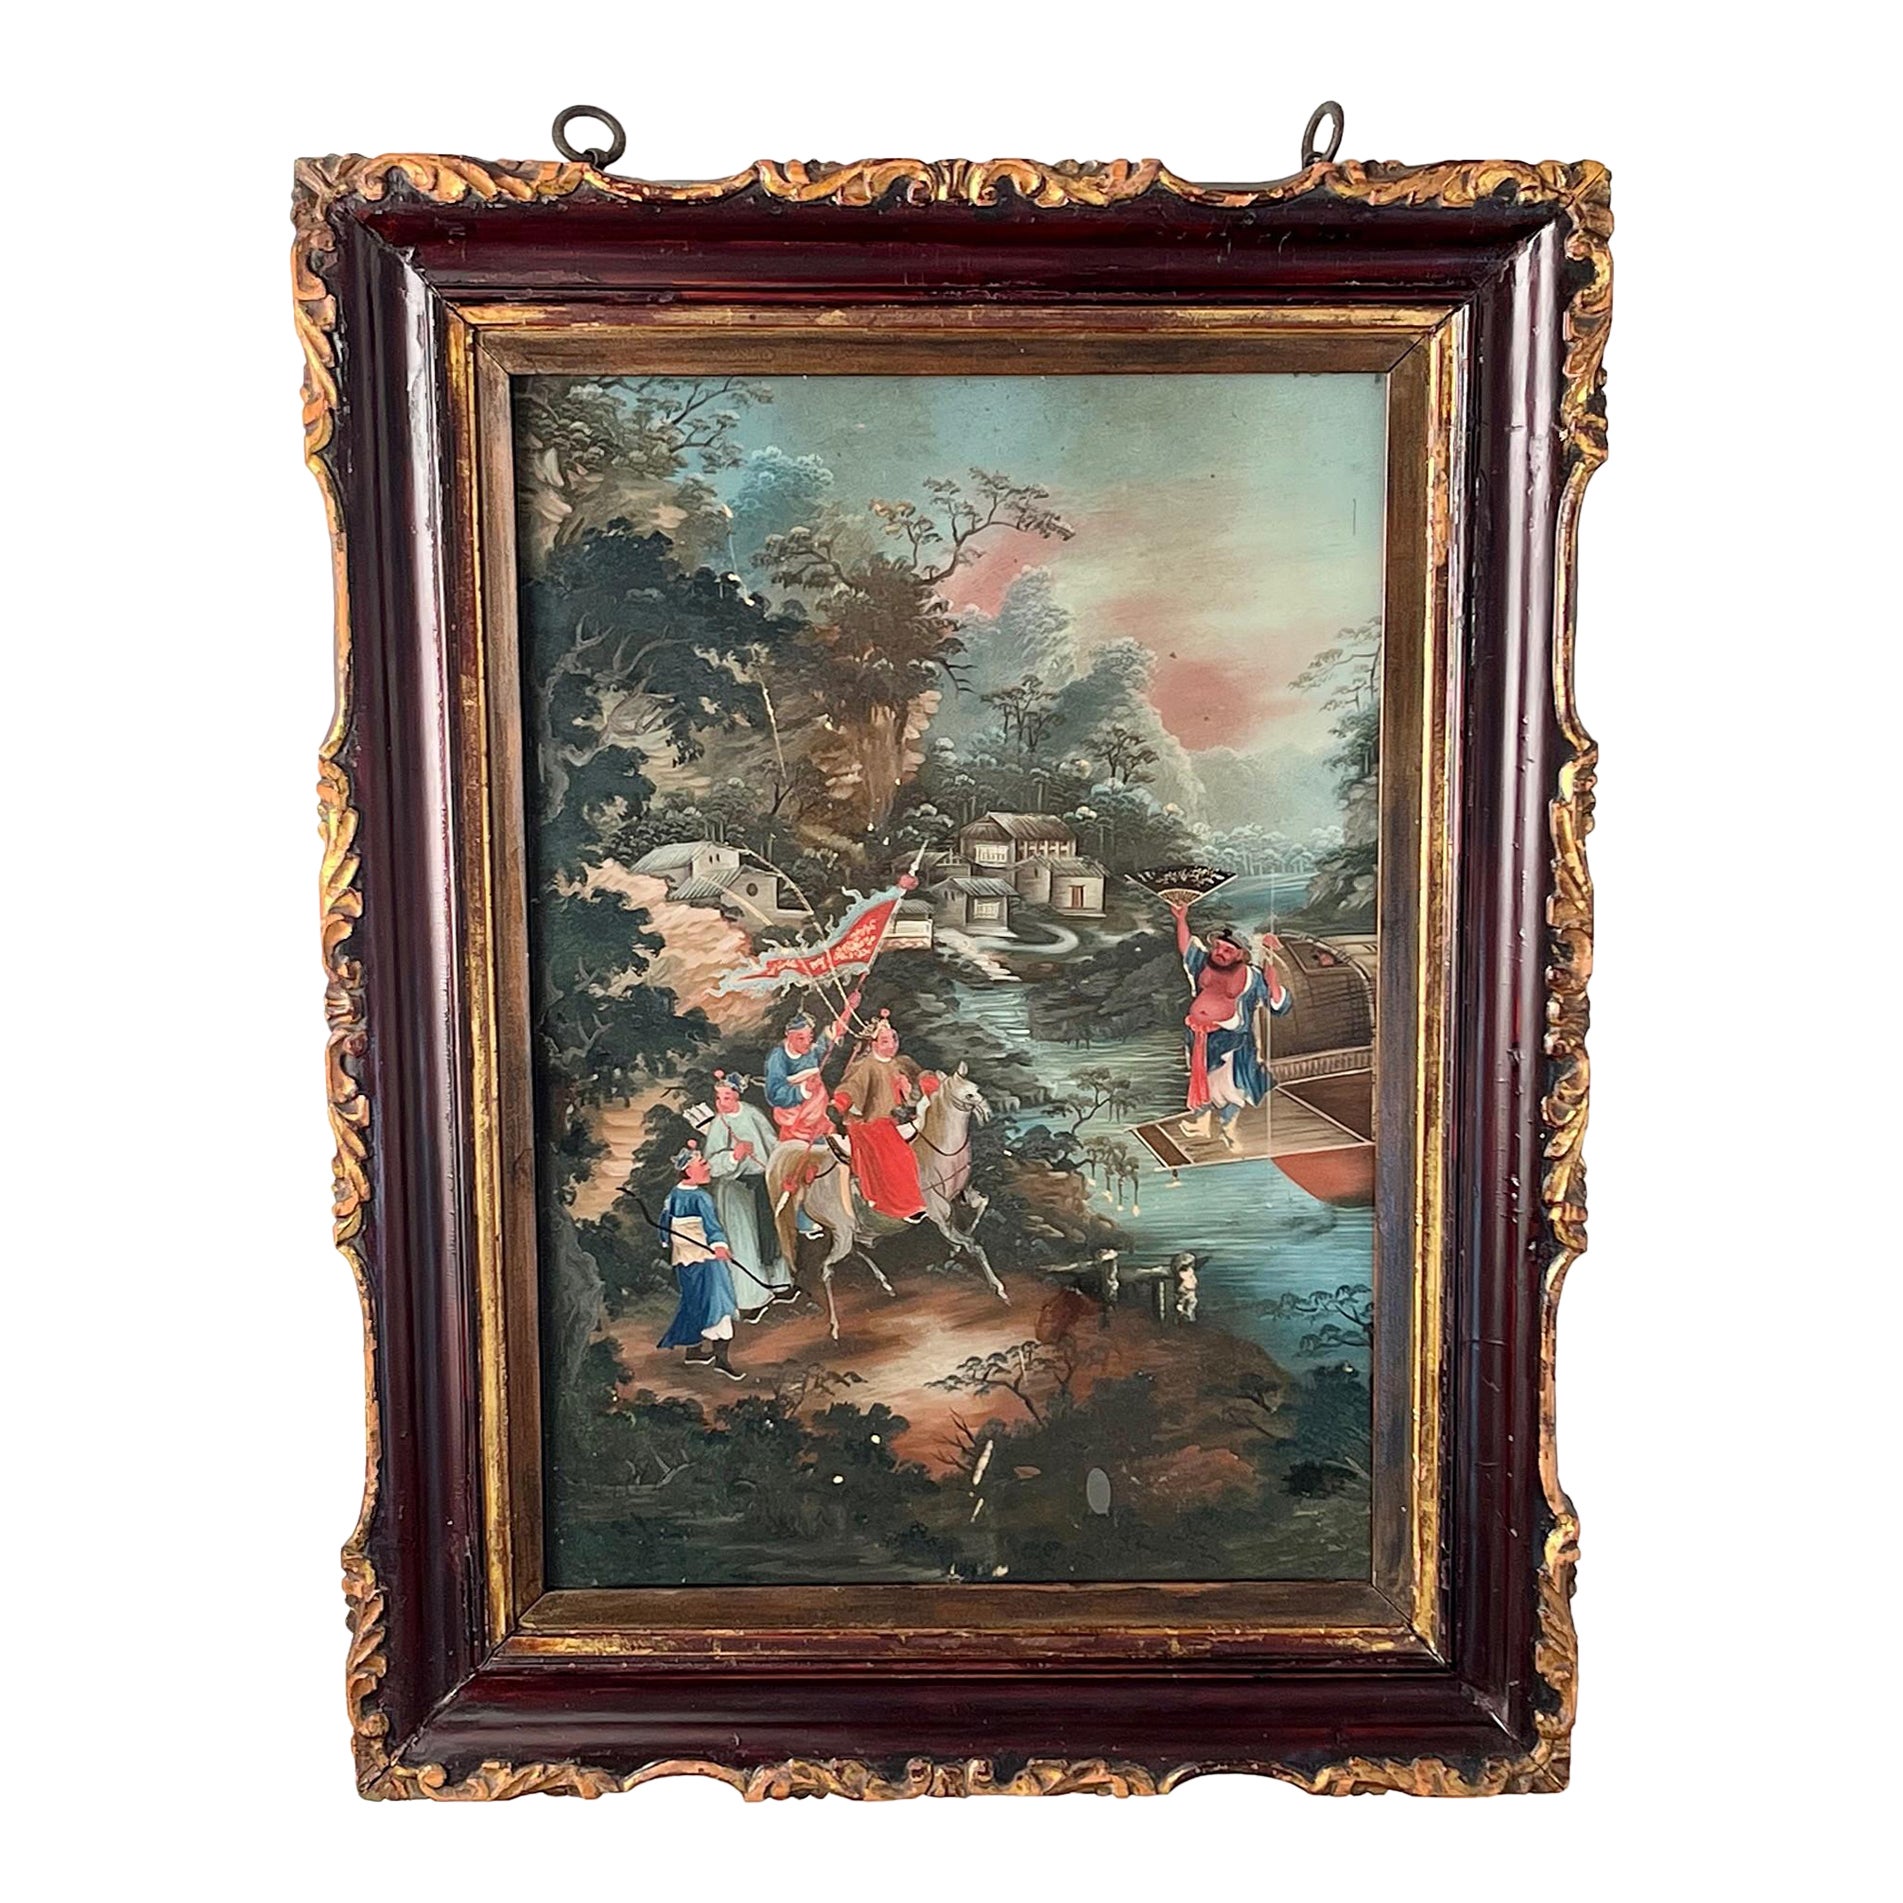 Chinese Export Reverse Glass Painting of Warriors in Landscape, circa 1825 For Sale